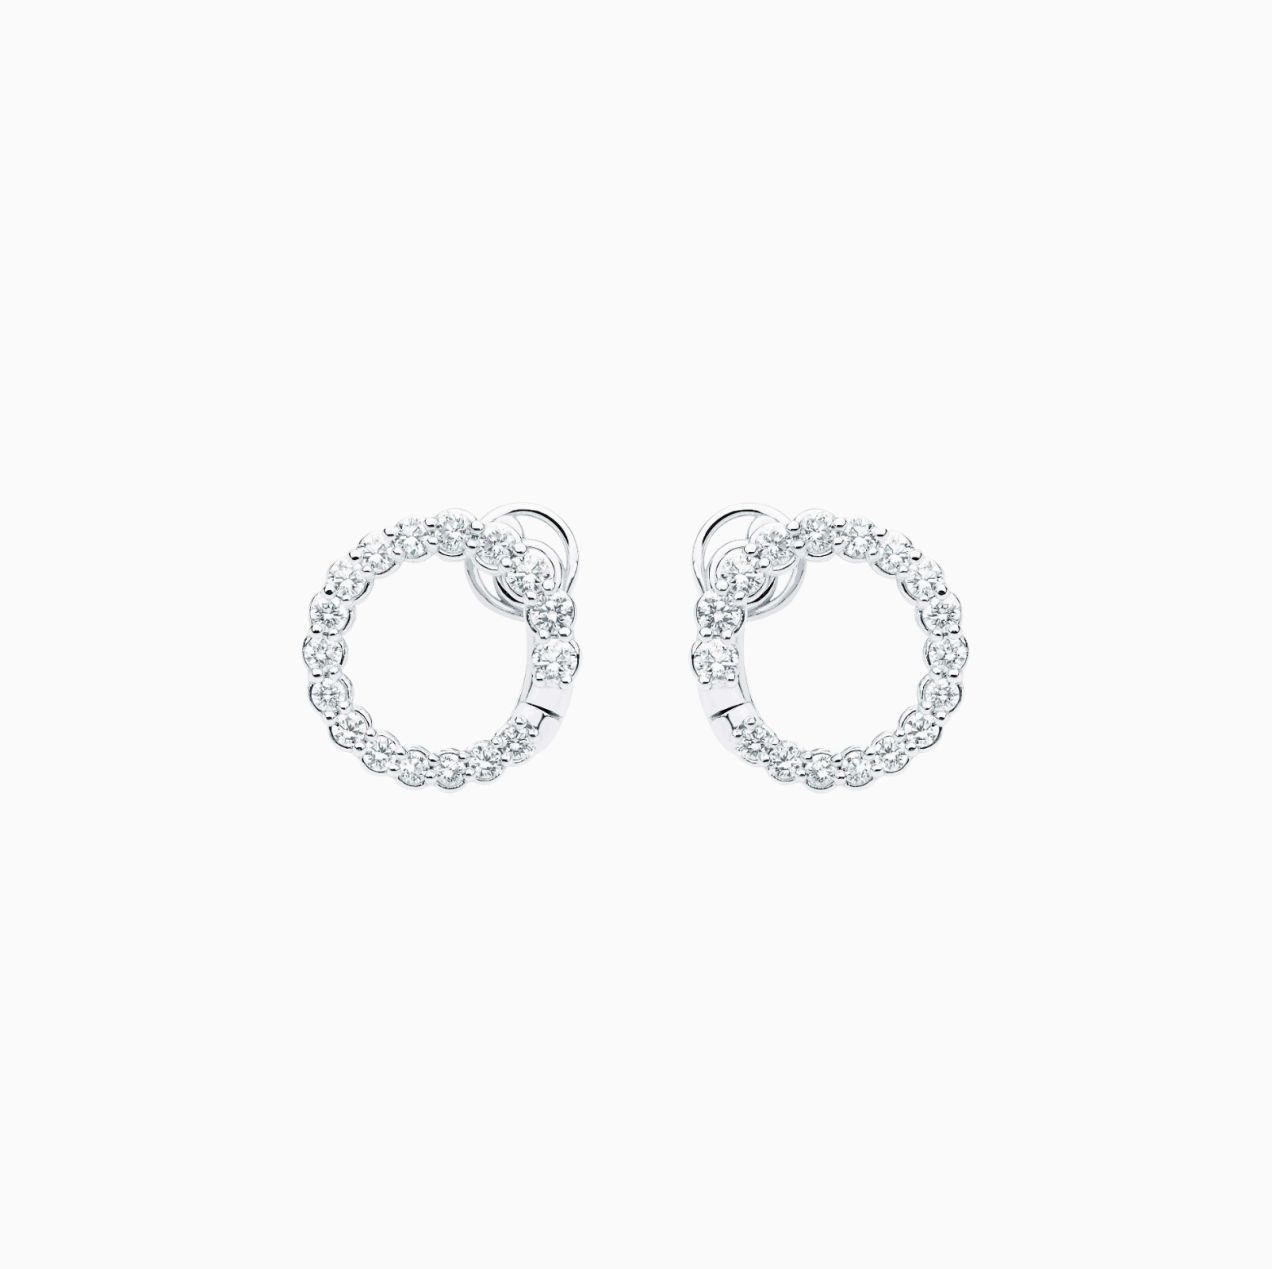 White gold ring earrings with bright size diamonds.